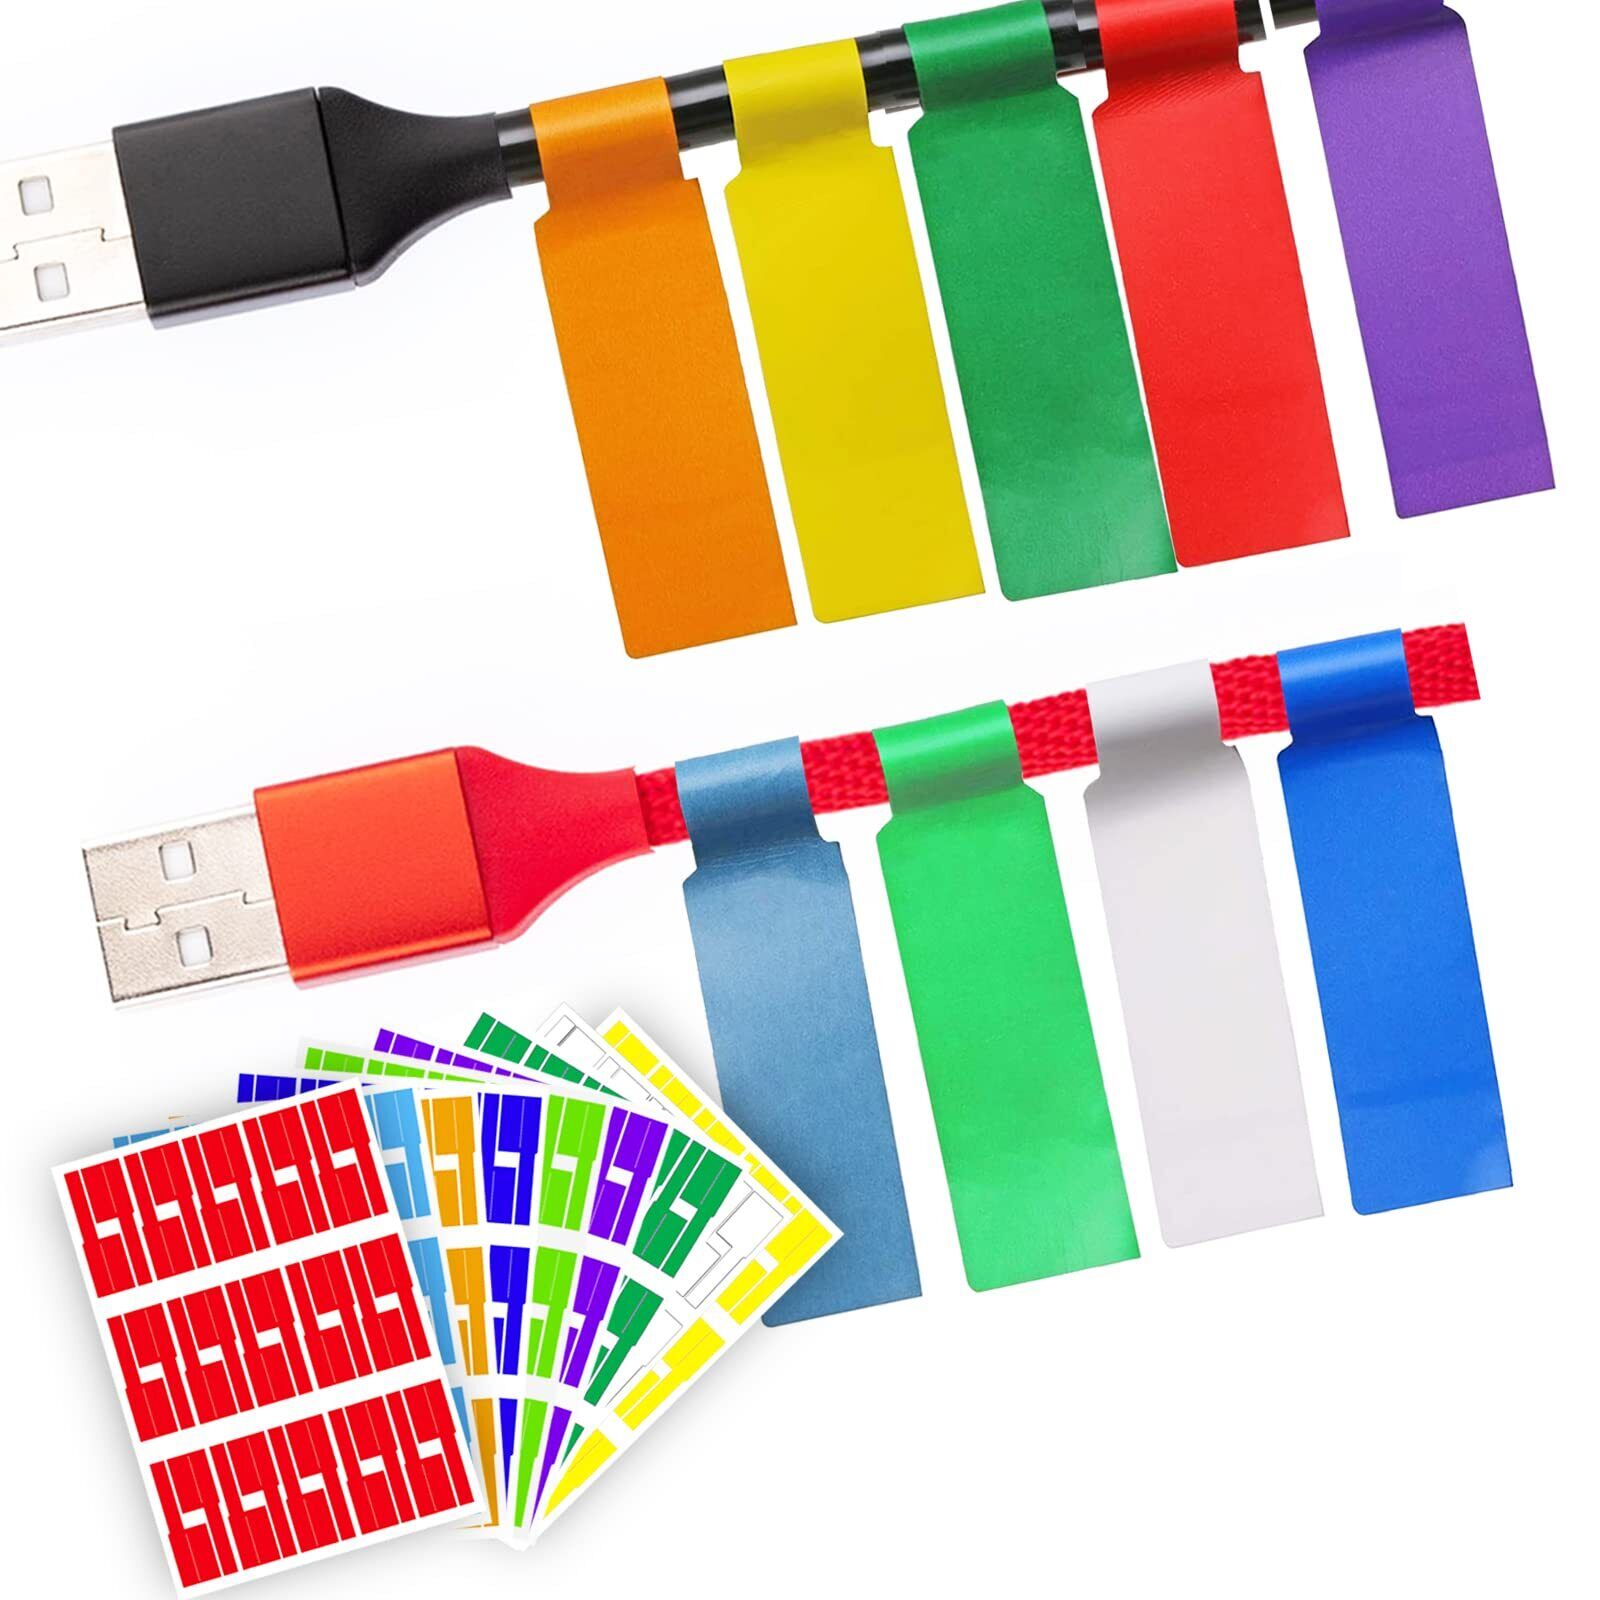 270 PCS Cable Labels, 9 Colors Waterproof Cable Tags Wire Labels for Cable Ma...